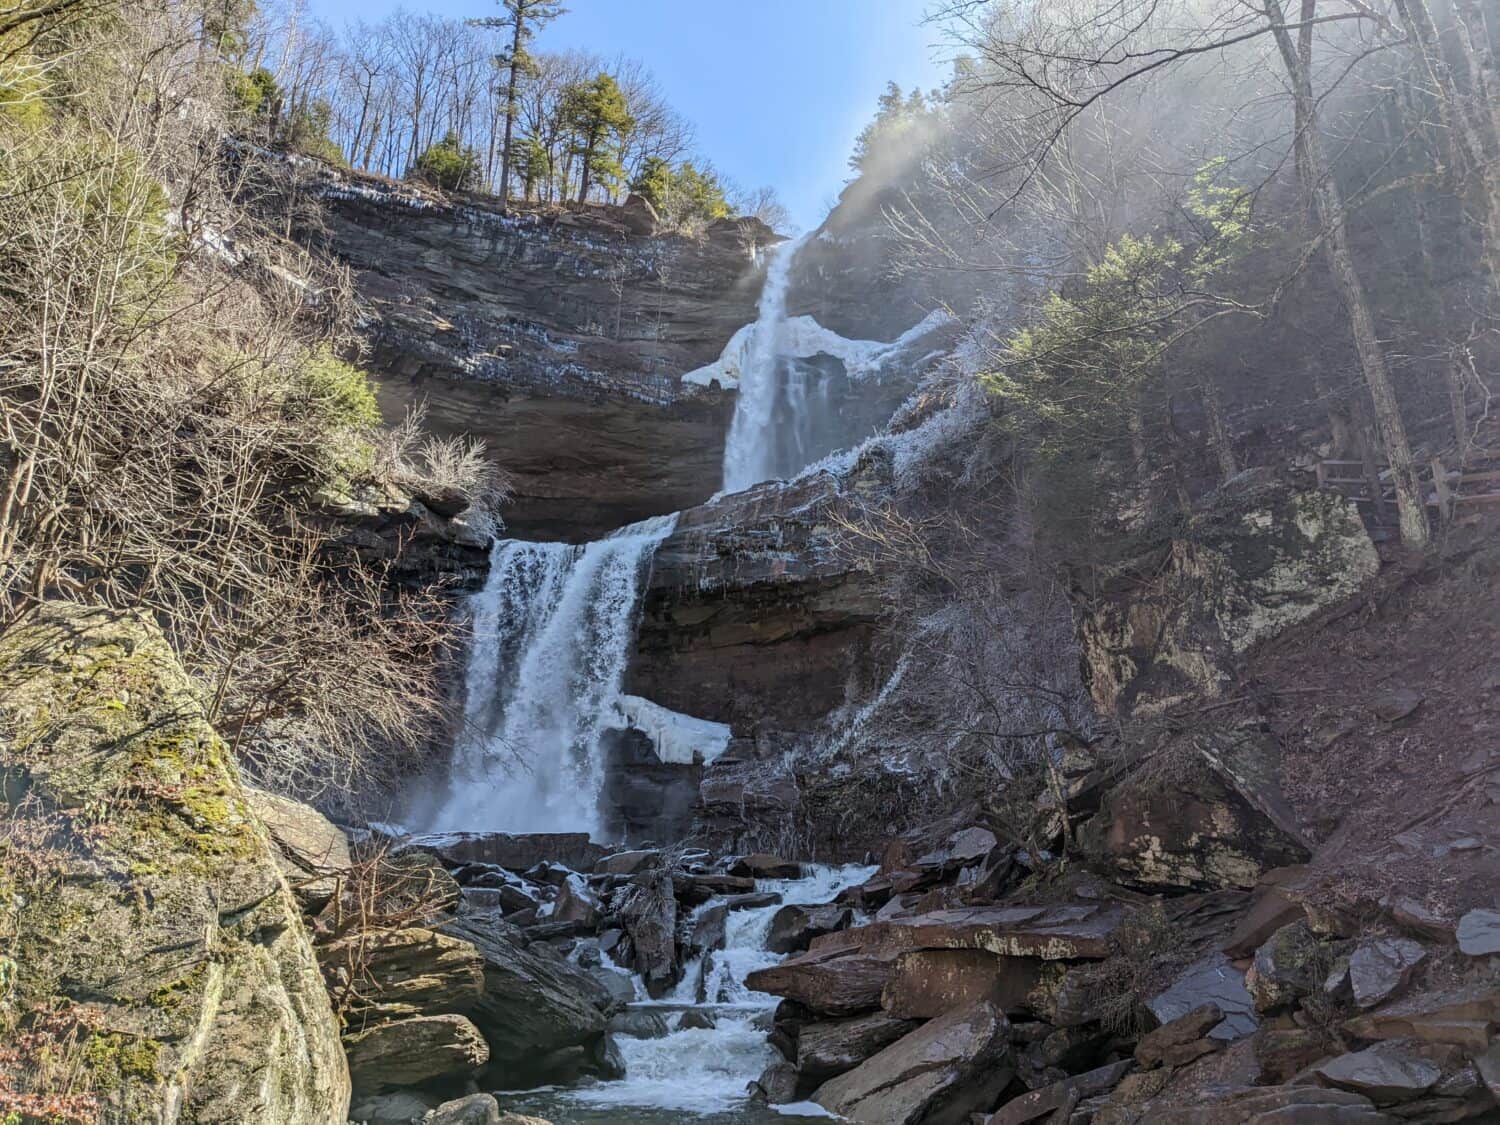 Overview of the Kaaterskill Falls in Haines Falls, NY - April 2022